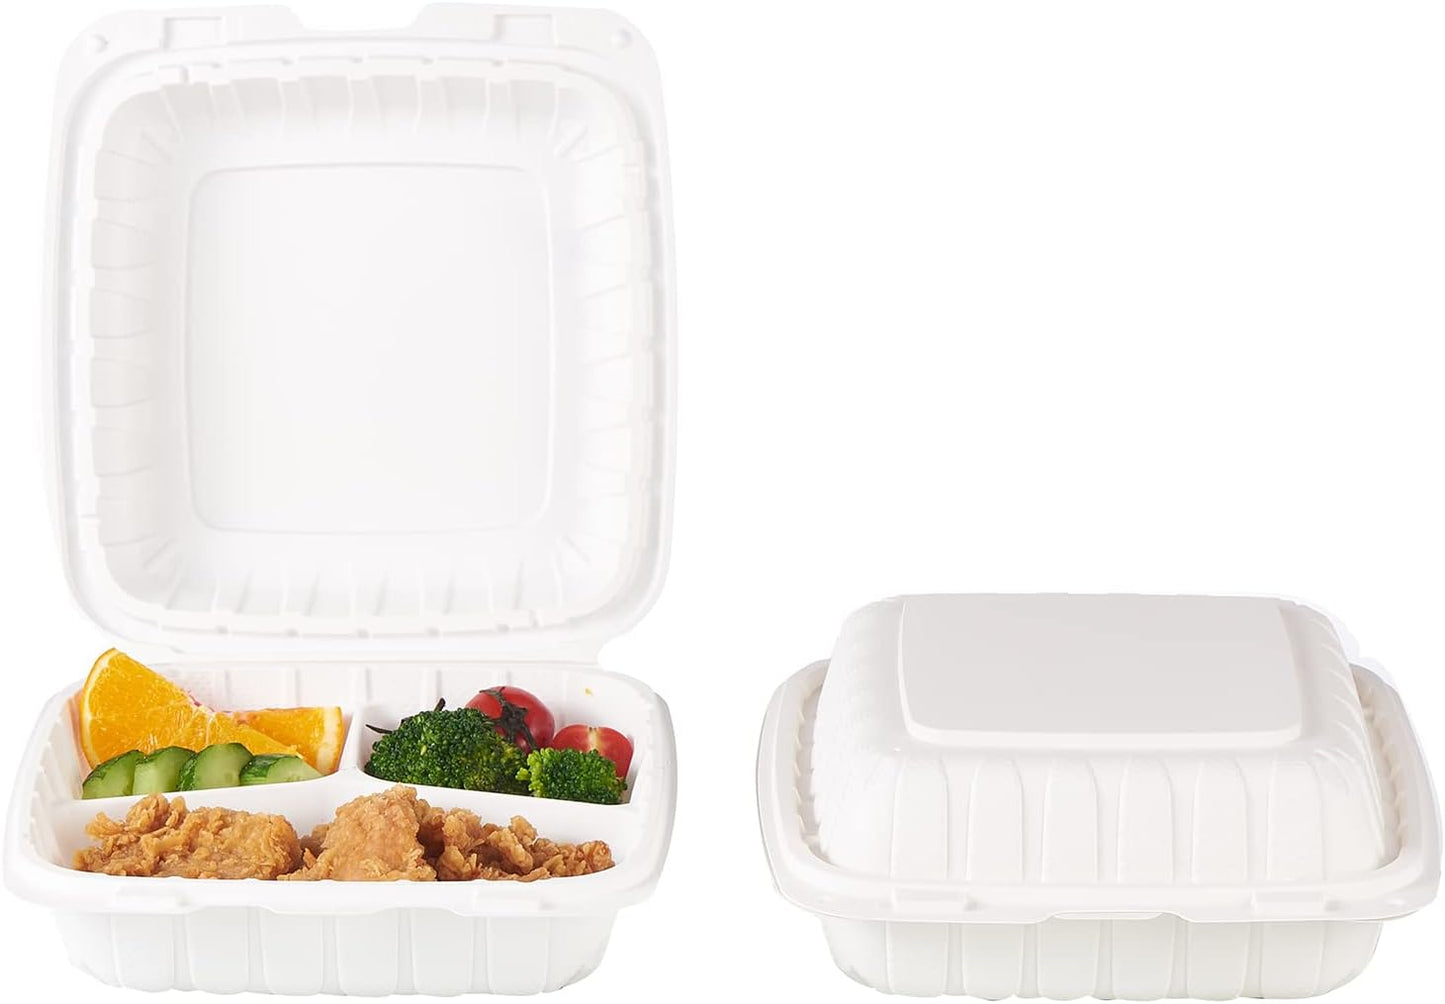 8"x8"X3" MFPP White Hinged Container With Lid 3 Compartment (Case of 200)